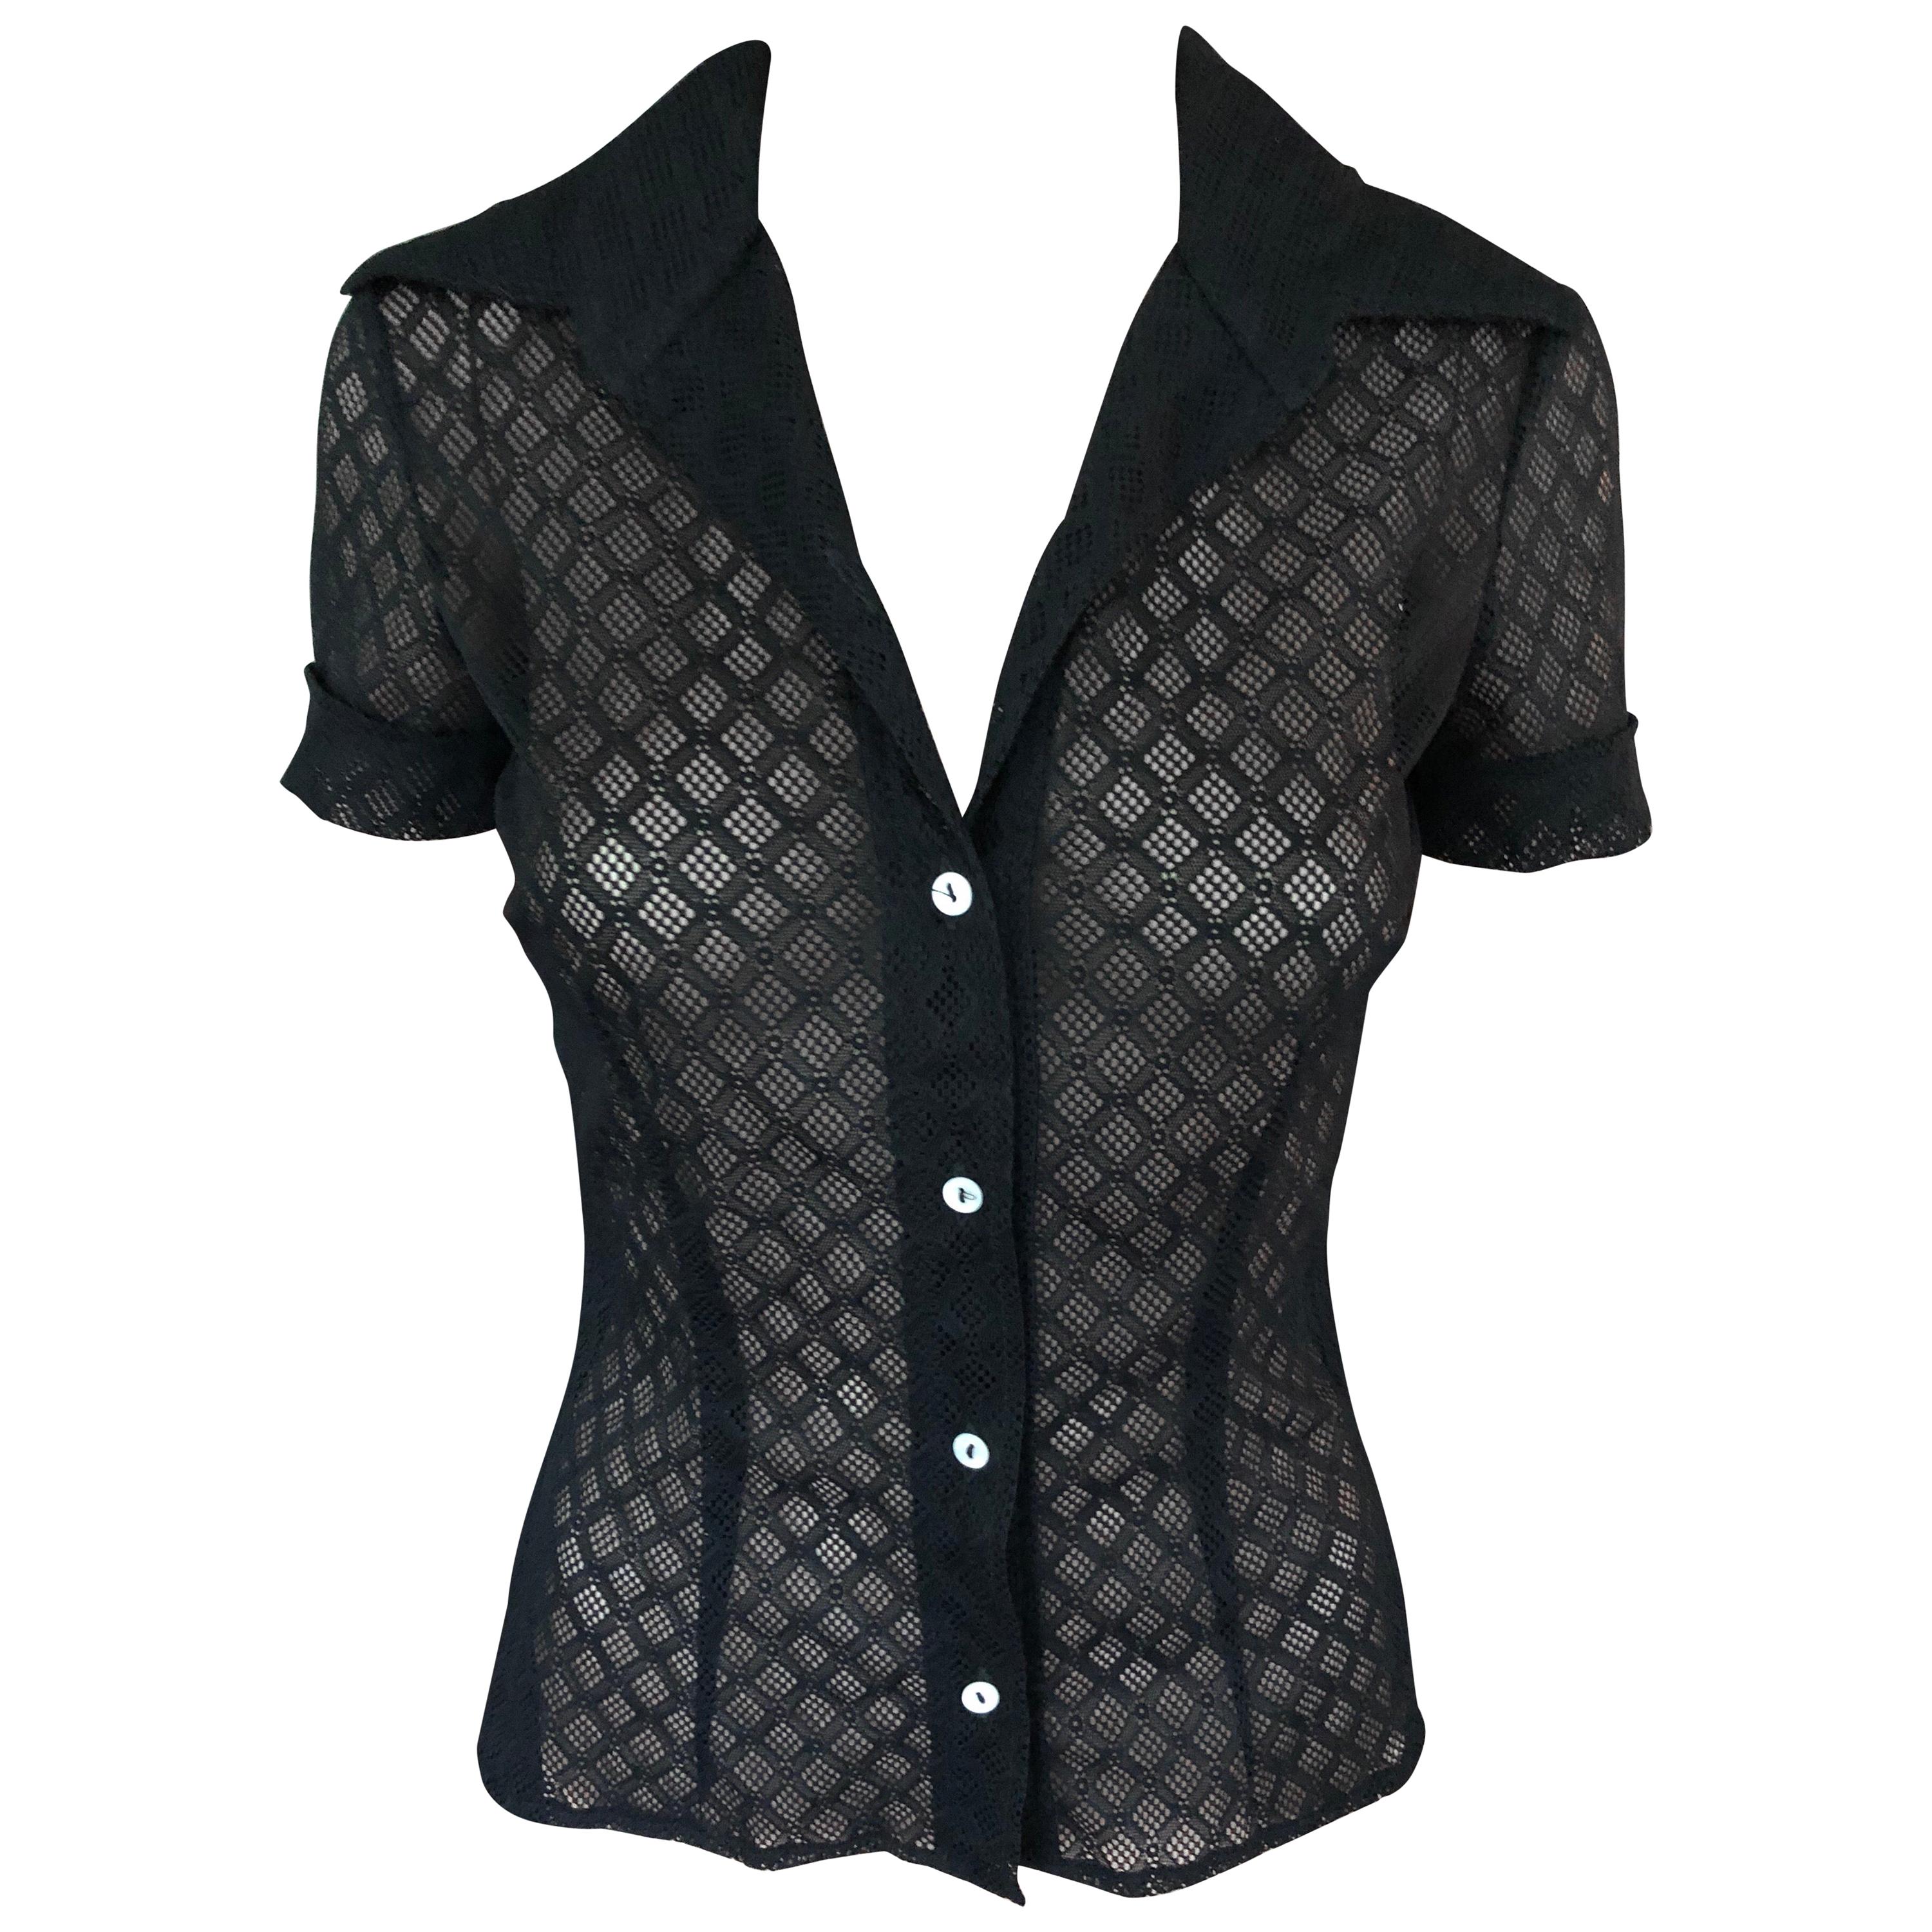 Dolce & Gabbana Vintage Sheer Mesh Lace Eyelet Button-Up Black Top Shirt Size S

Dolce & Gabbana sheer stretchy lace mesh eyelet black top with pointed collar, short sleeves, and exposed button closures at front. Please note the size tag has been